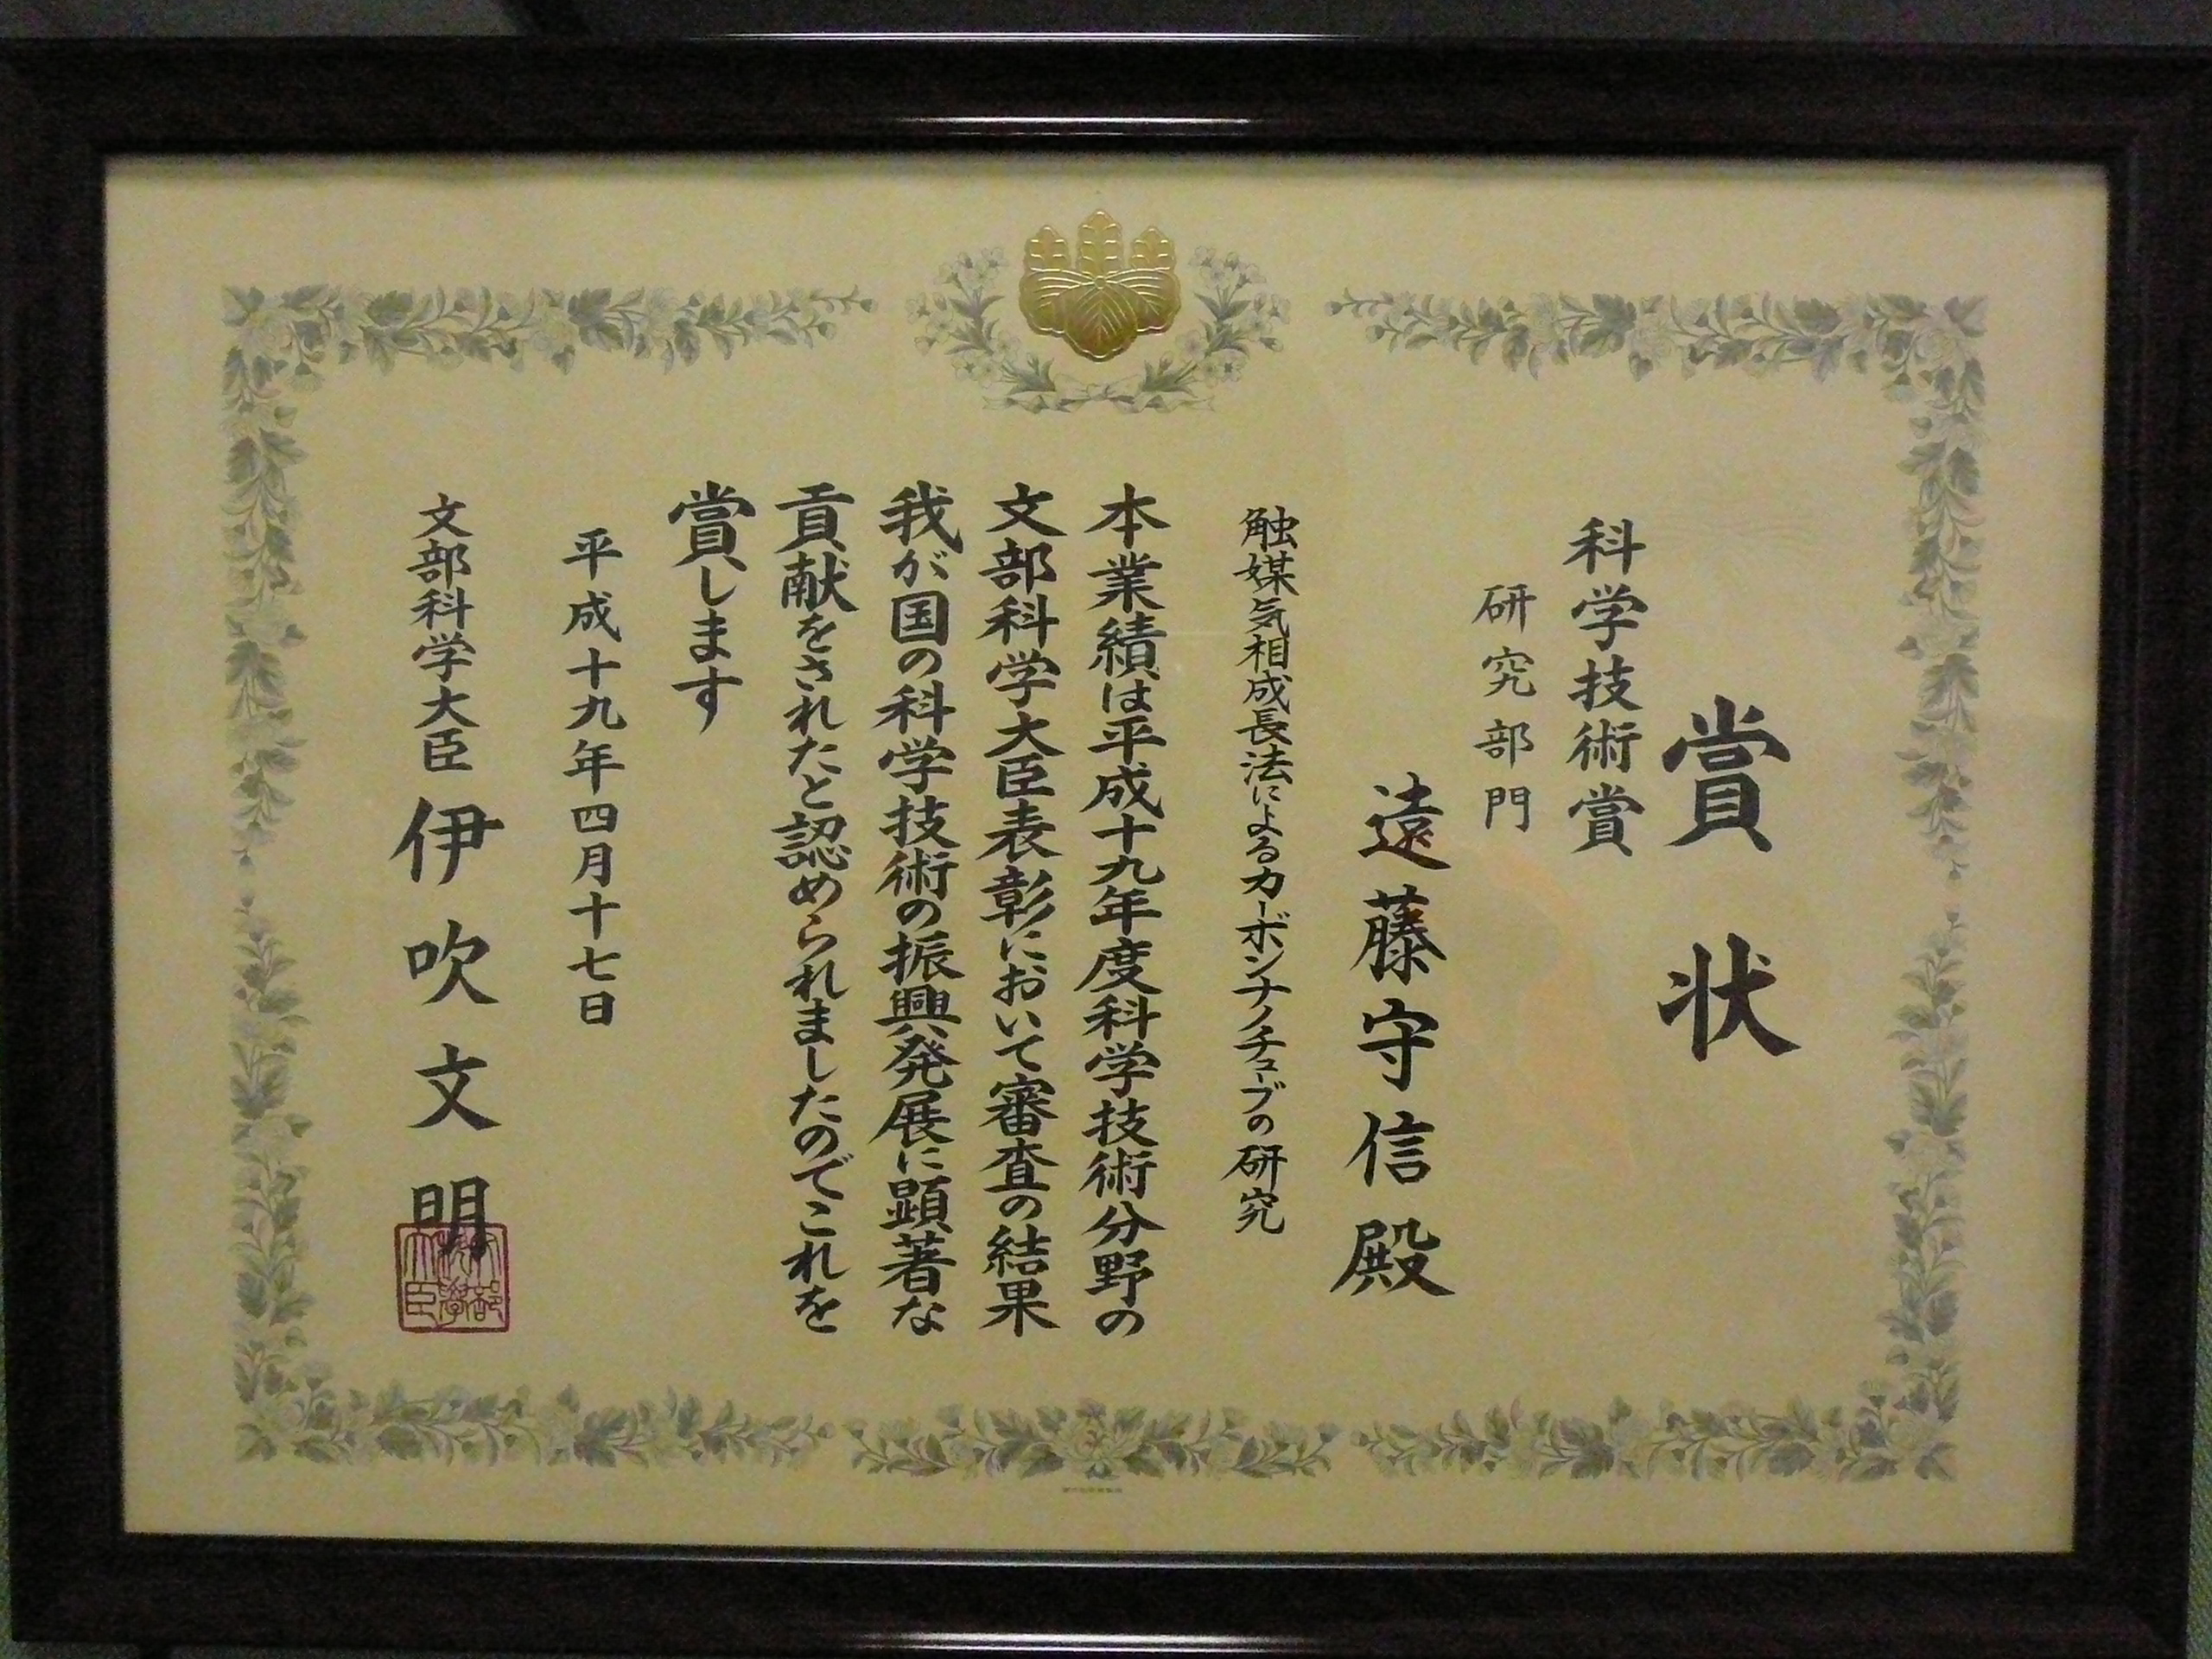 Prof. Endo was commended by the Minister of Education, Culture, Sports, Science and Technology